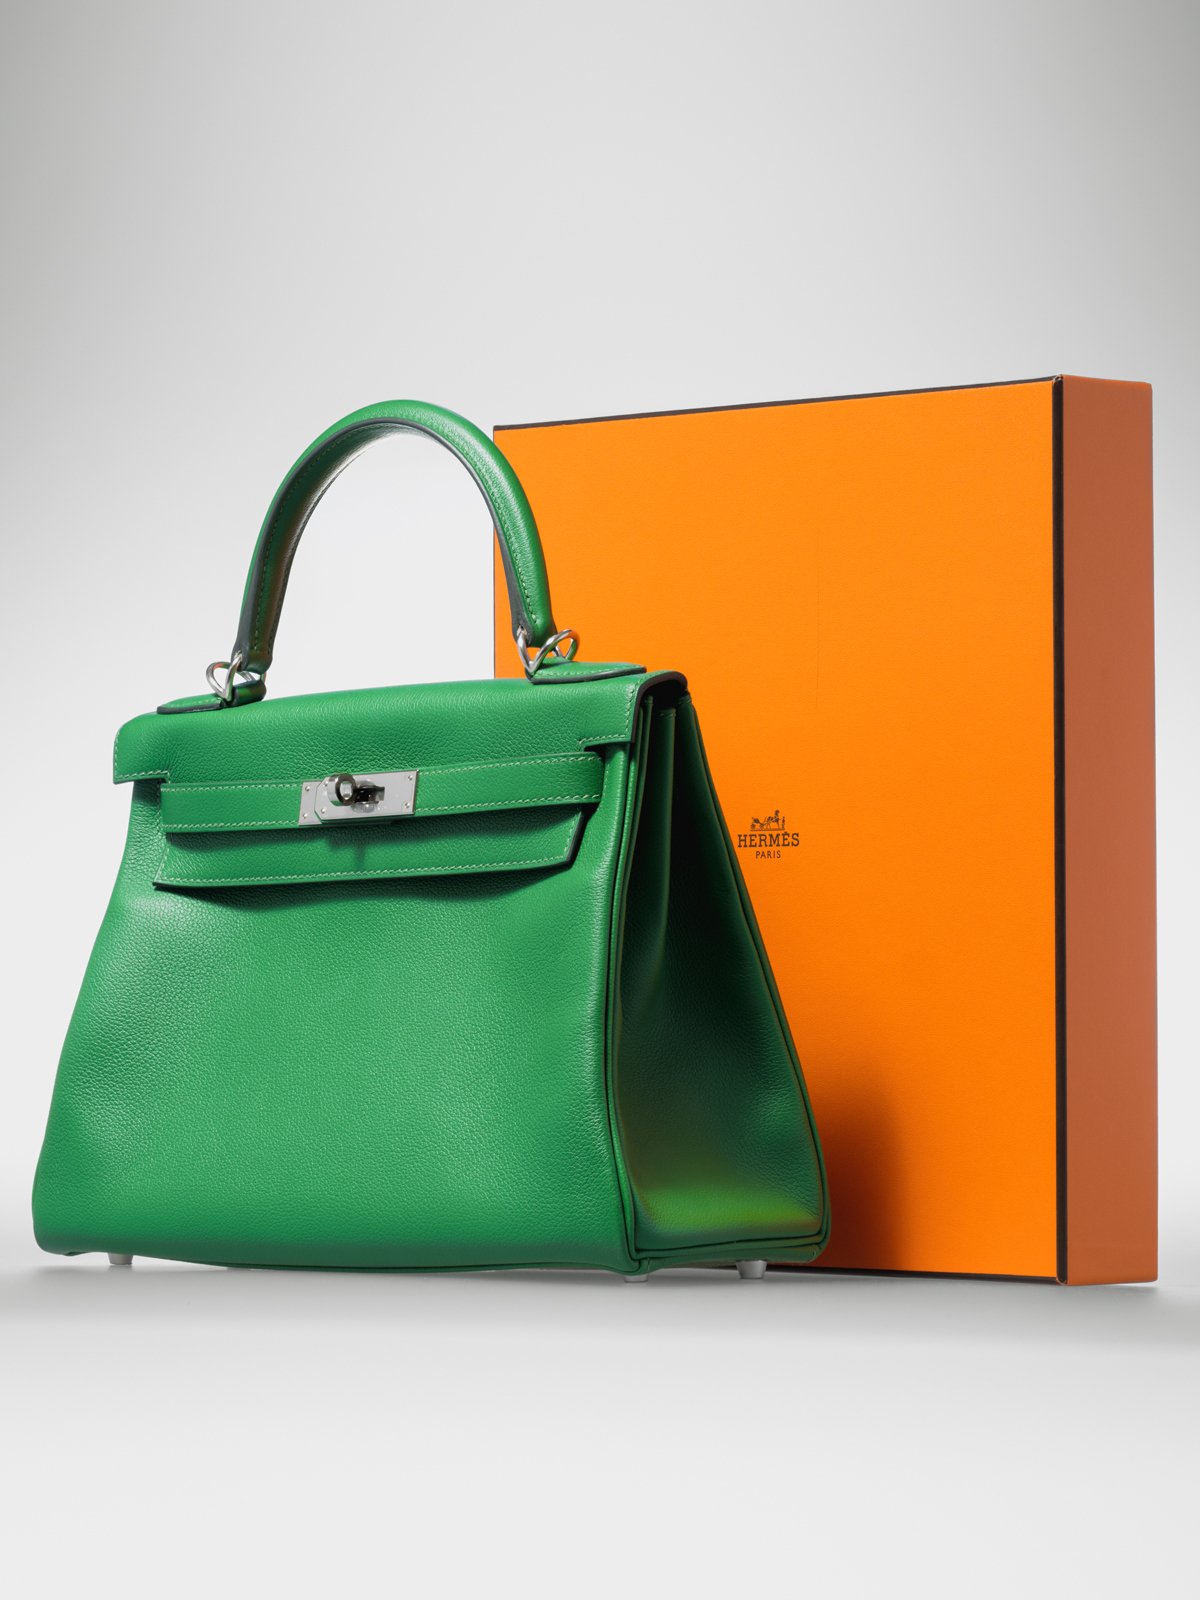 Shopping with James: Limited Hermes Kelly Cut Bag